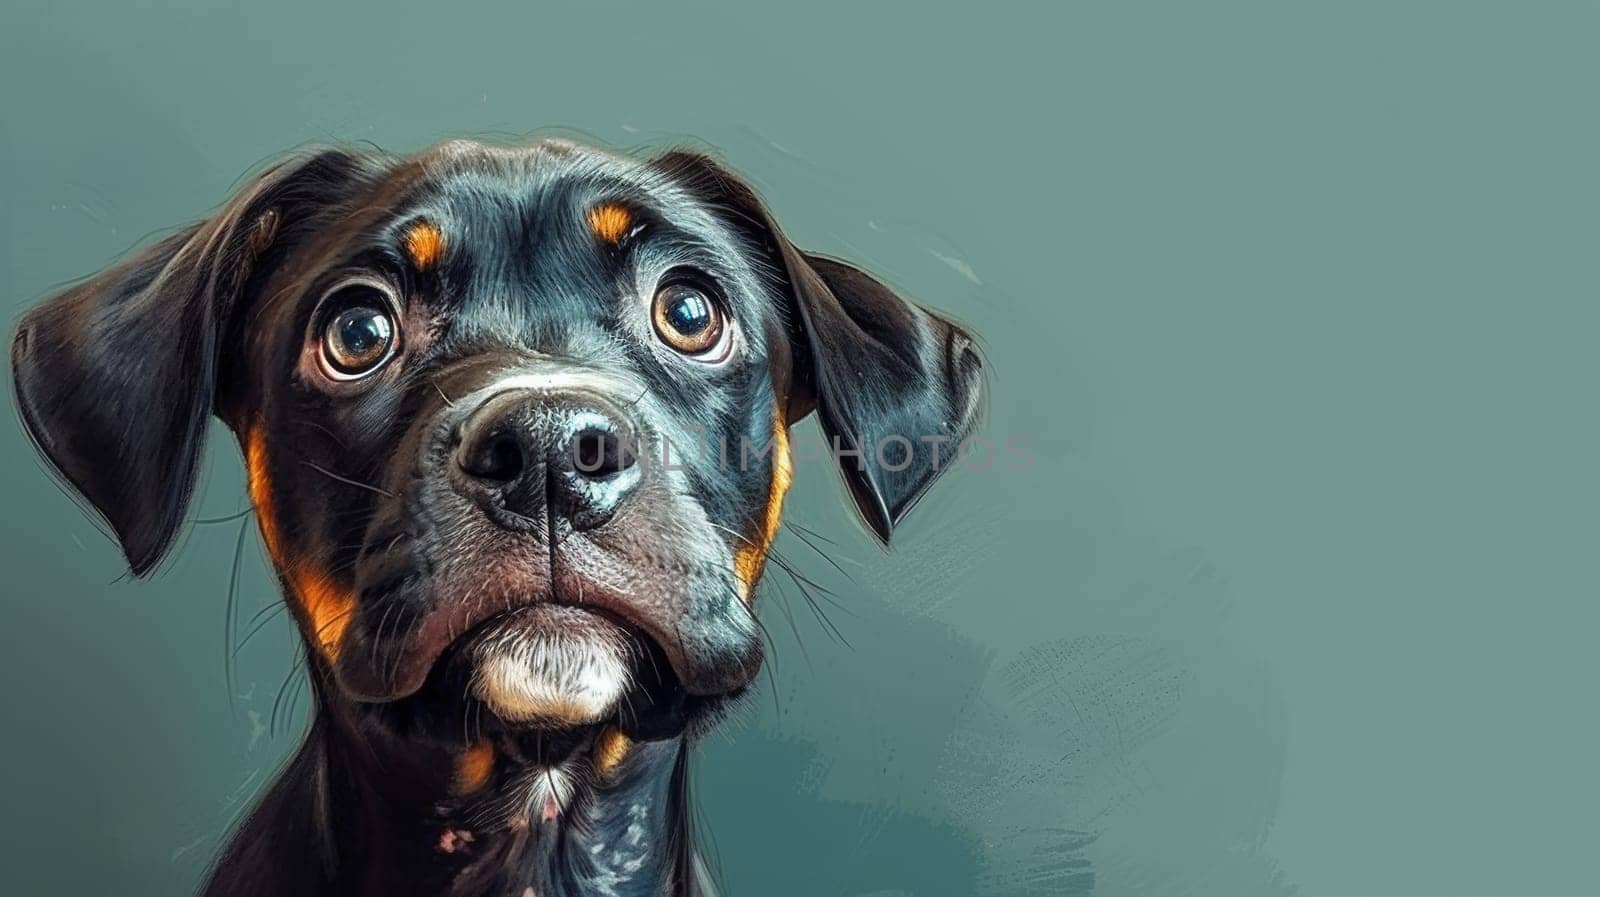 A black and brown dog with a sad look on his face